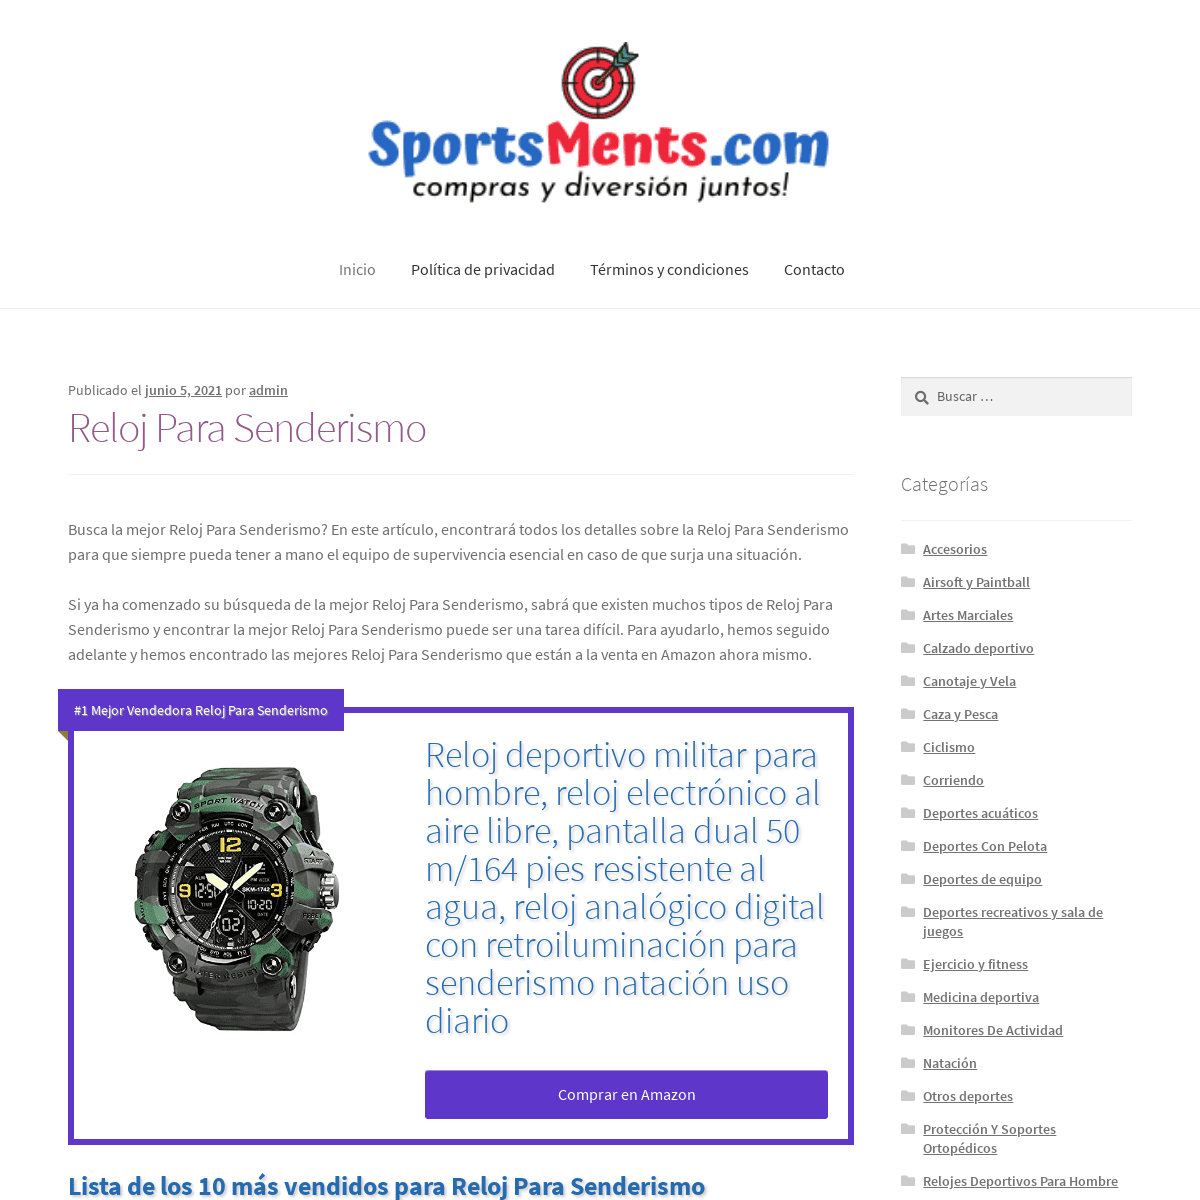 A complete backup of https://sportsments.com